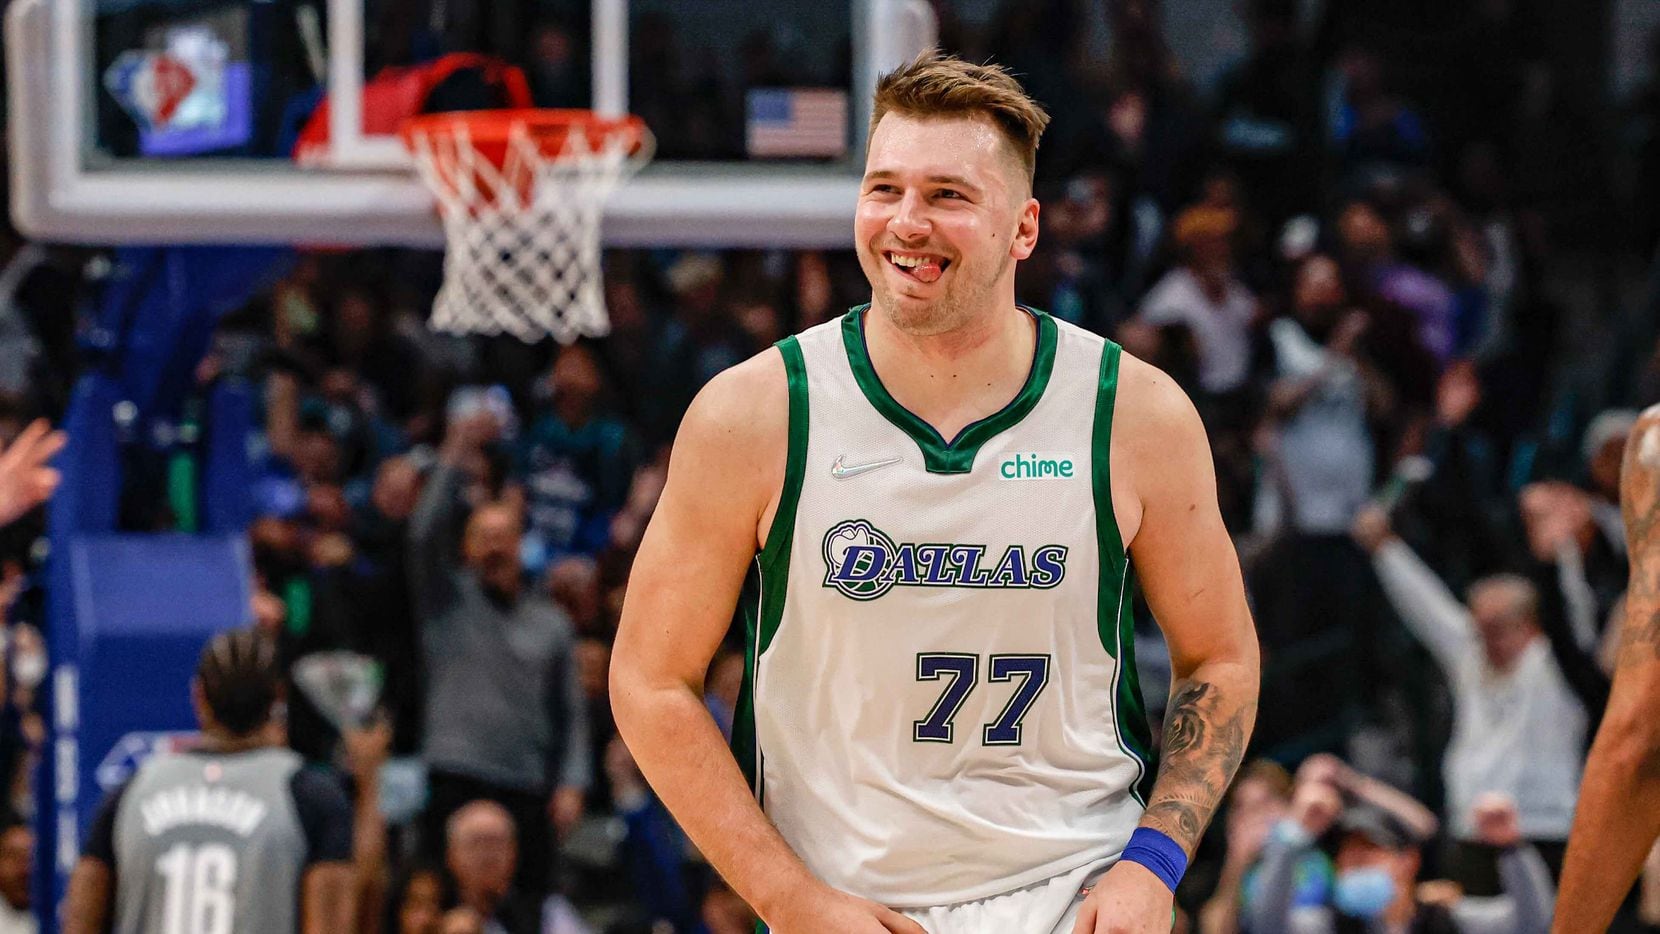 Dallas Mavericks guard Luka Doncic (77) celebrates a 3 points shot against the Brooklyn Nets Dallas Mavericks during the first half at the American Airlines Center in Dallas on Tuesday, December 7, 2021.